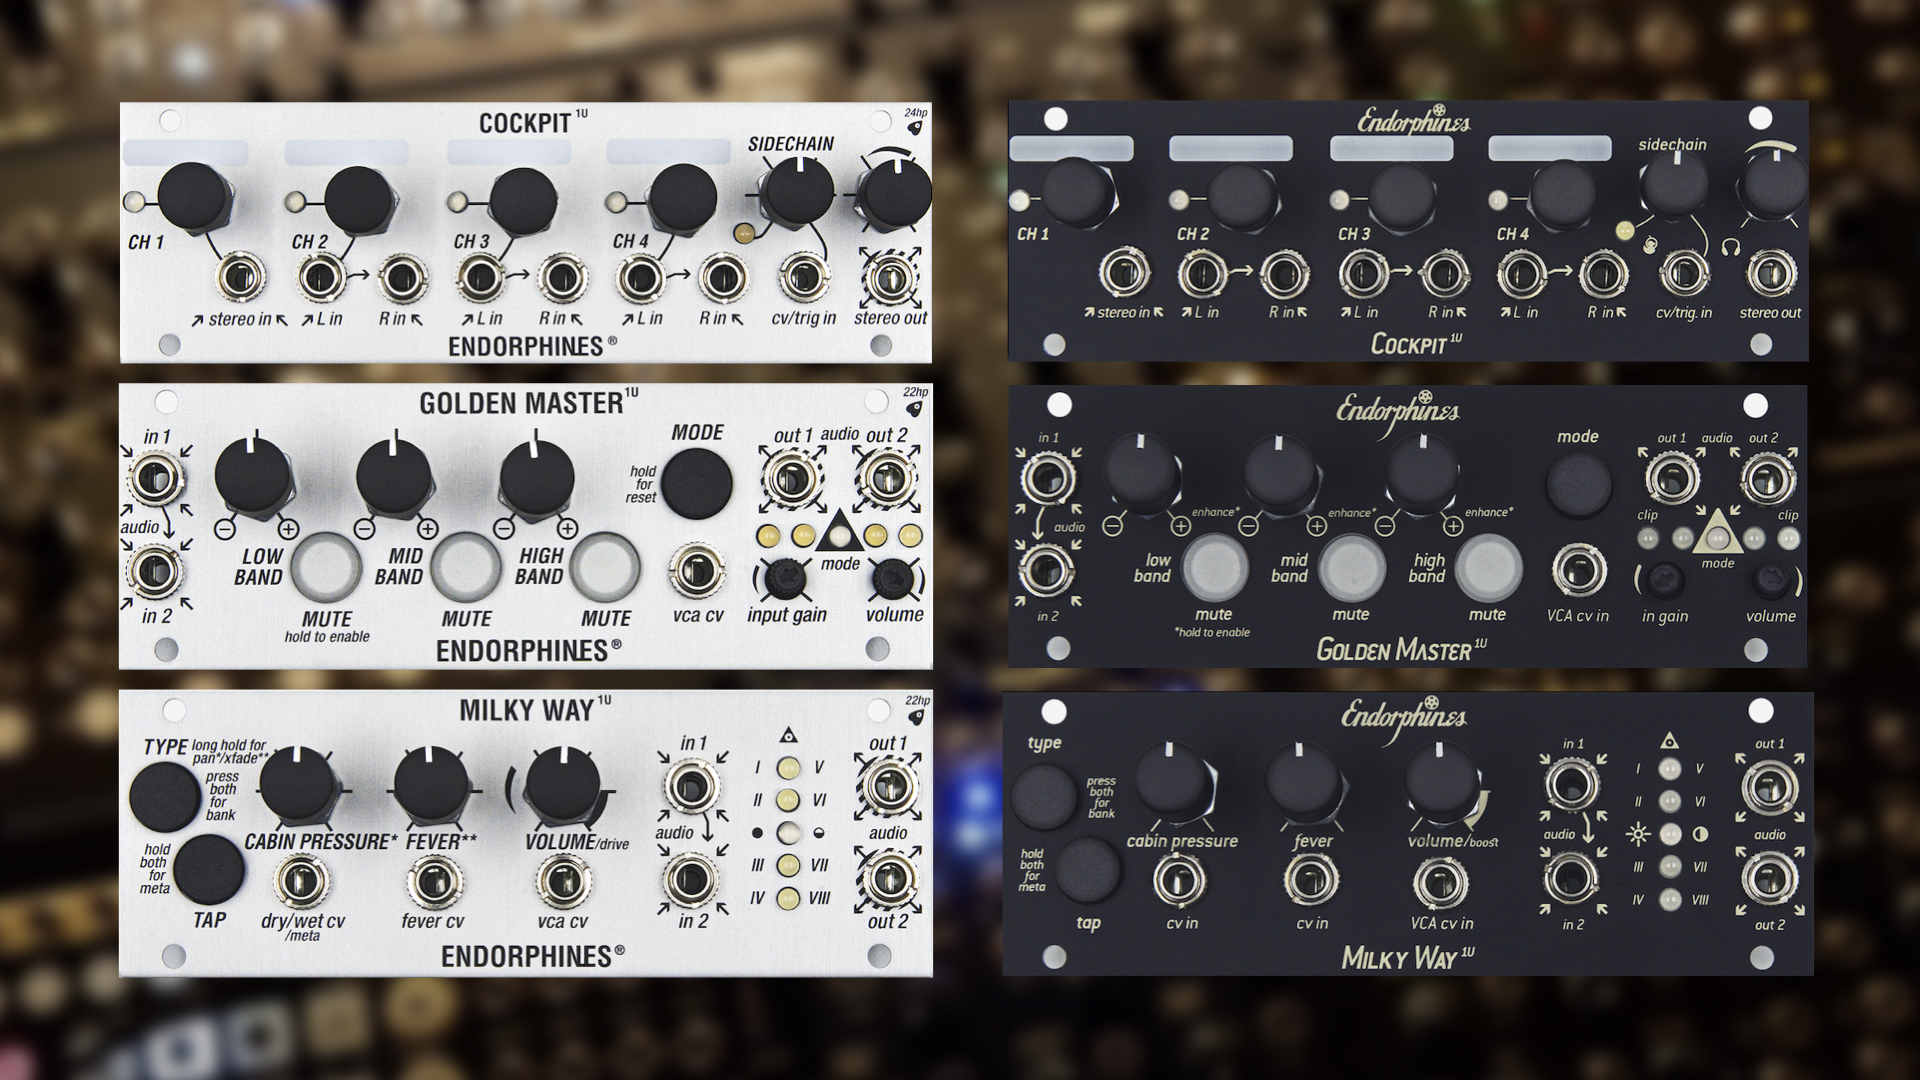 Endorphin.es' first 1U modules are out now: Cockpit, Golden Master  Milky  Way